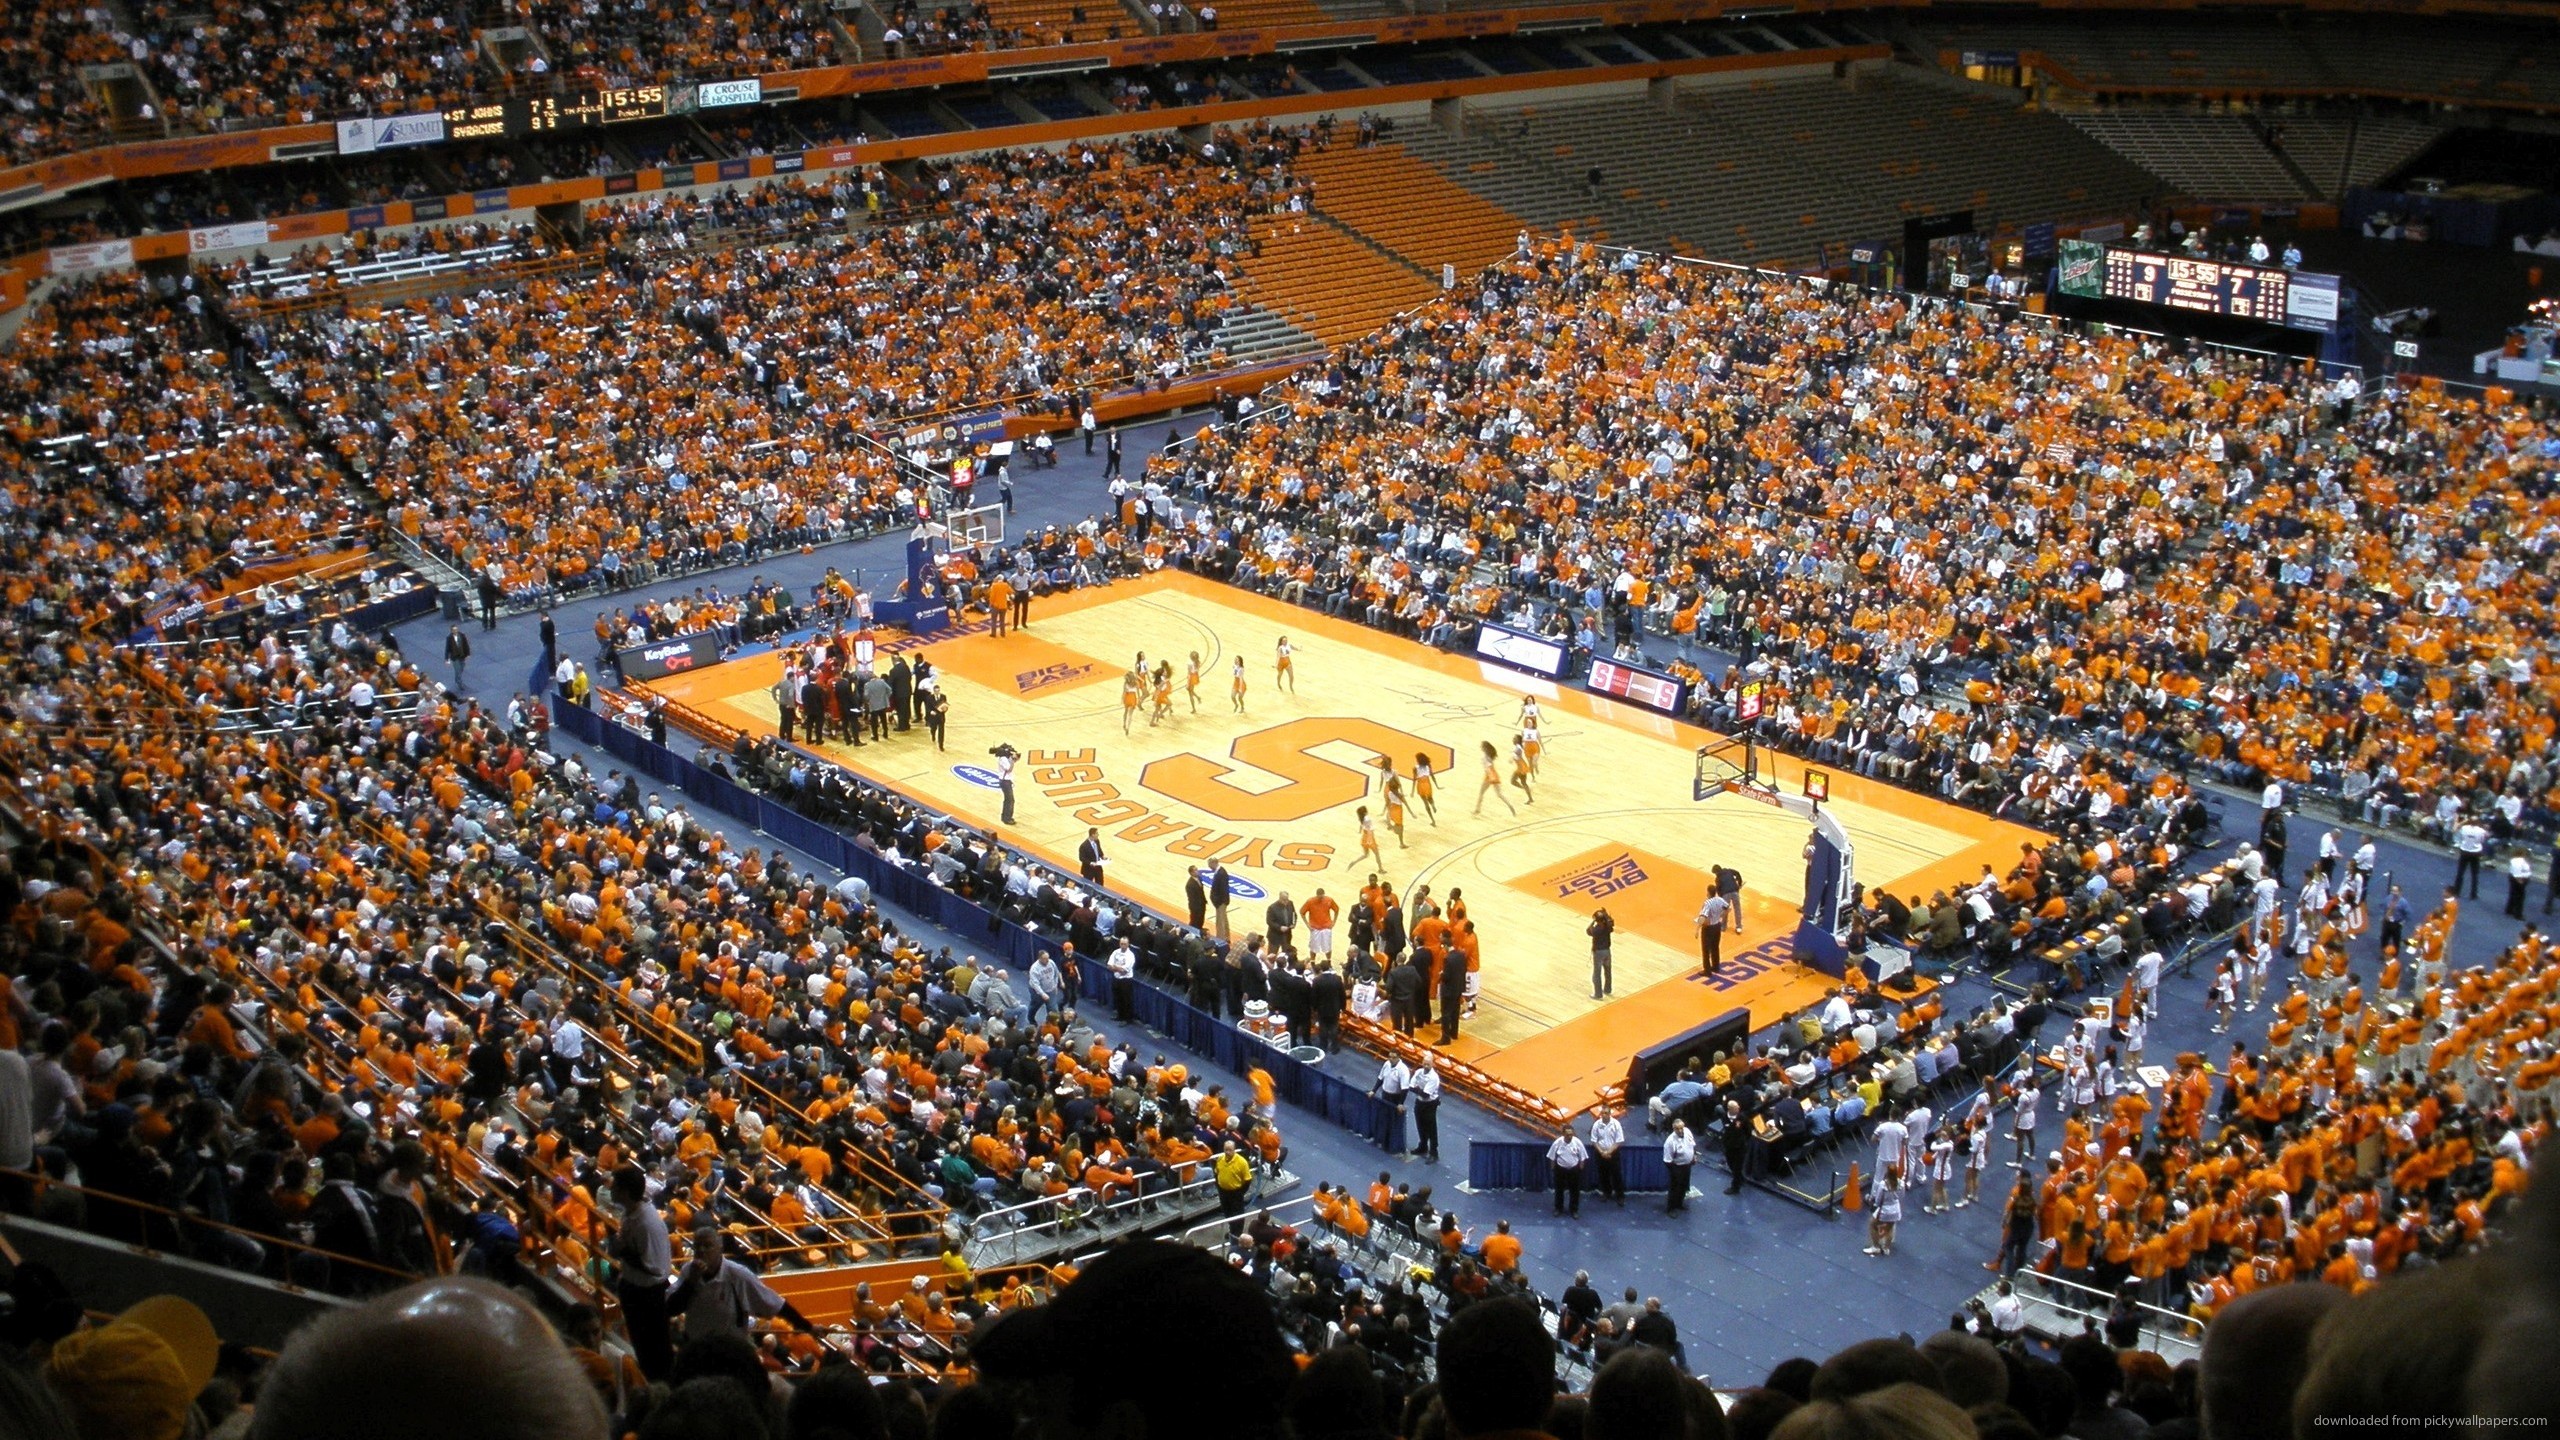 Download 2560x1440 Syracuse Basketball Dome Wallpaper